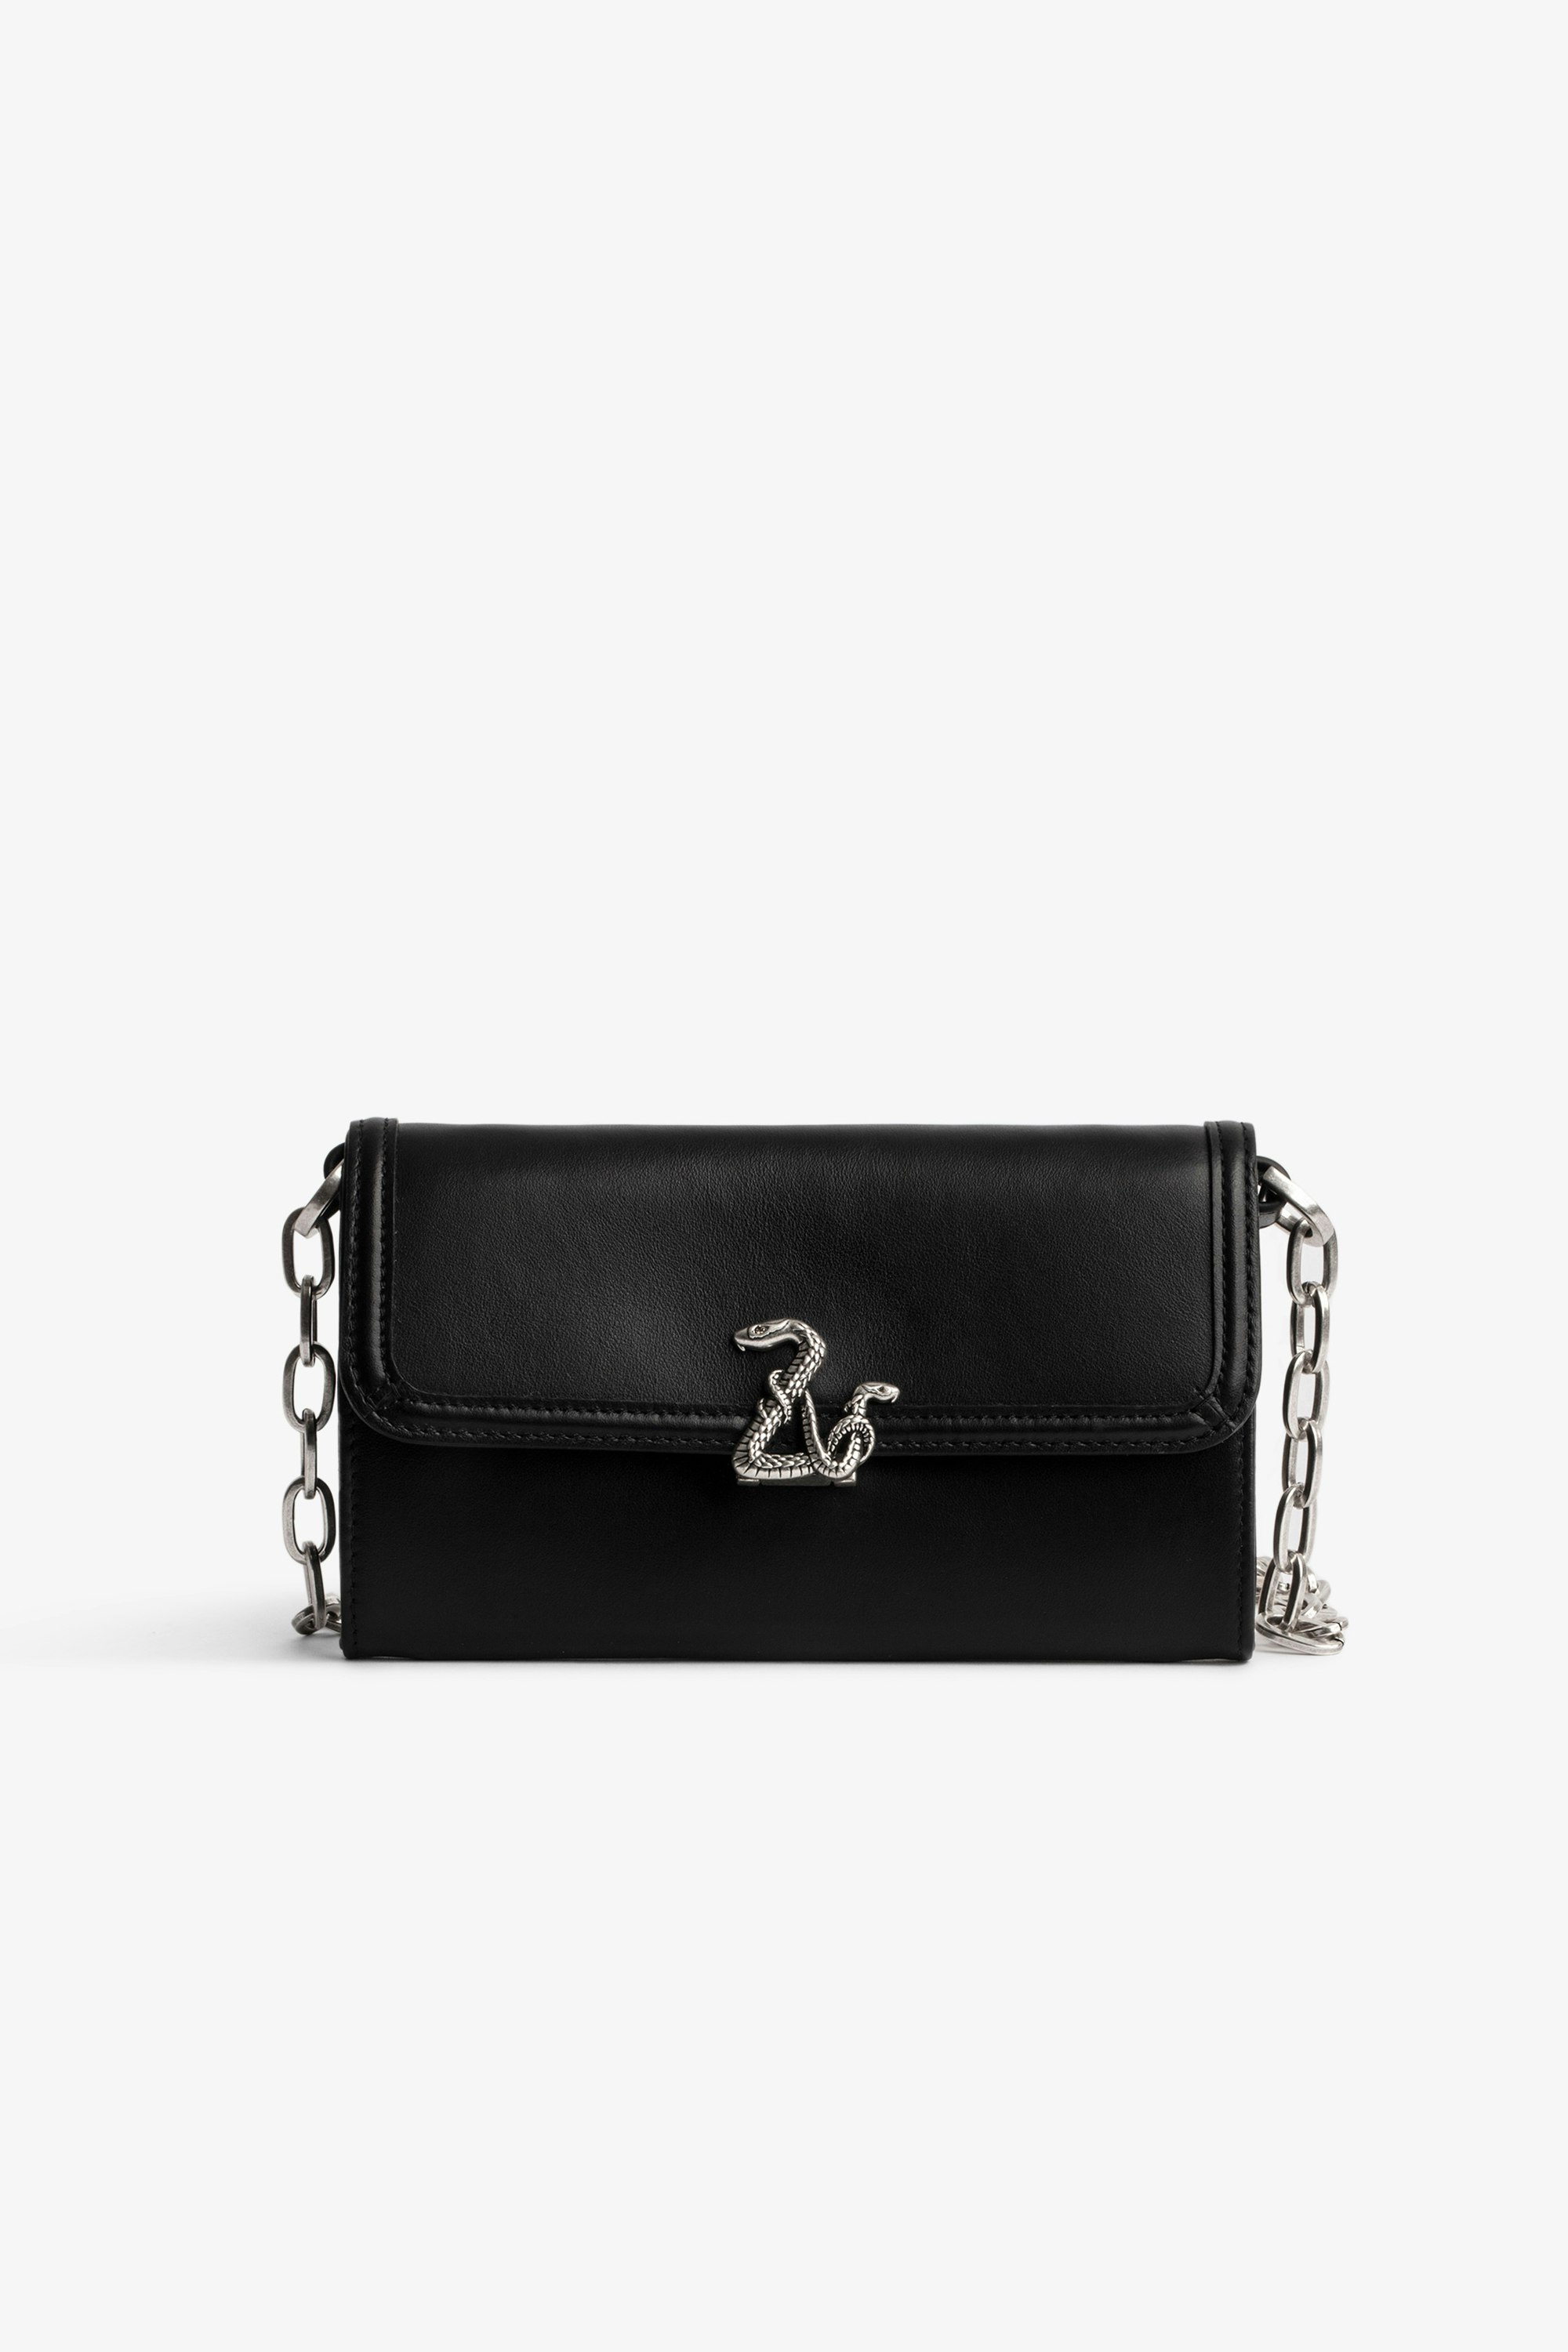 ZV Initiale Snake Le Long Wallet Women’s black leather and ZV snake wallet